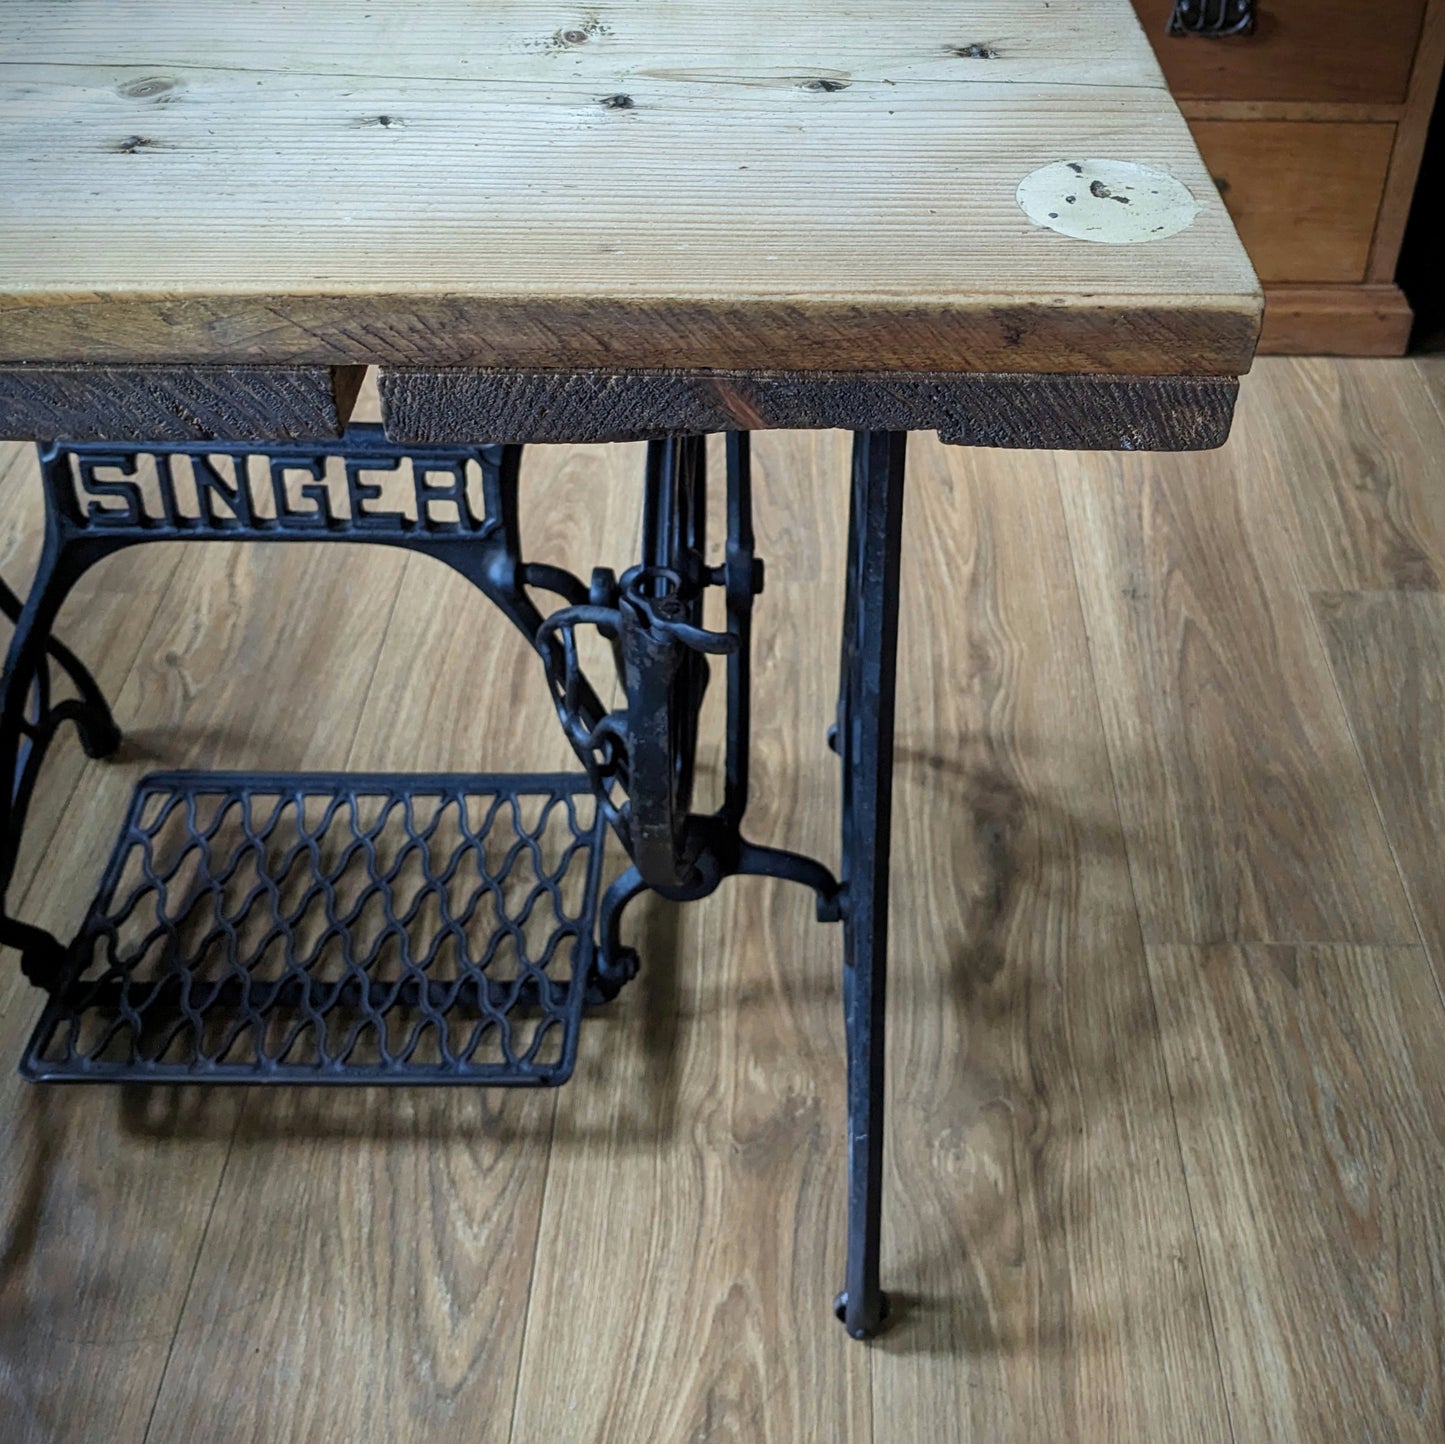 Antique Singer Table with Reclaimed Top